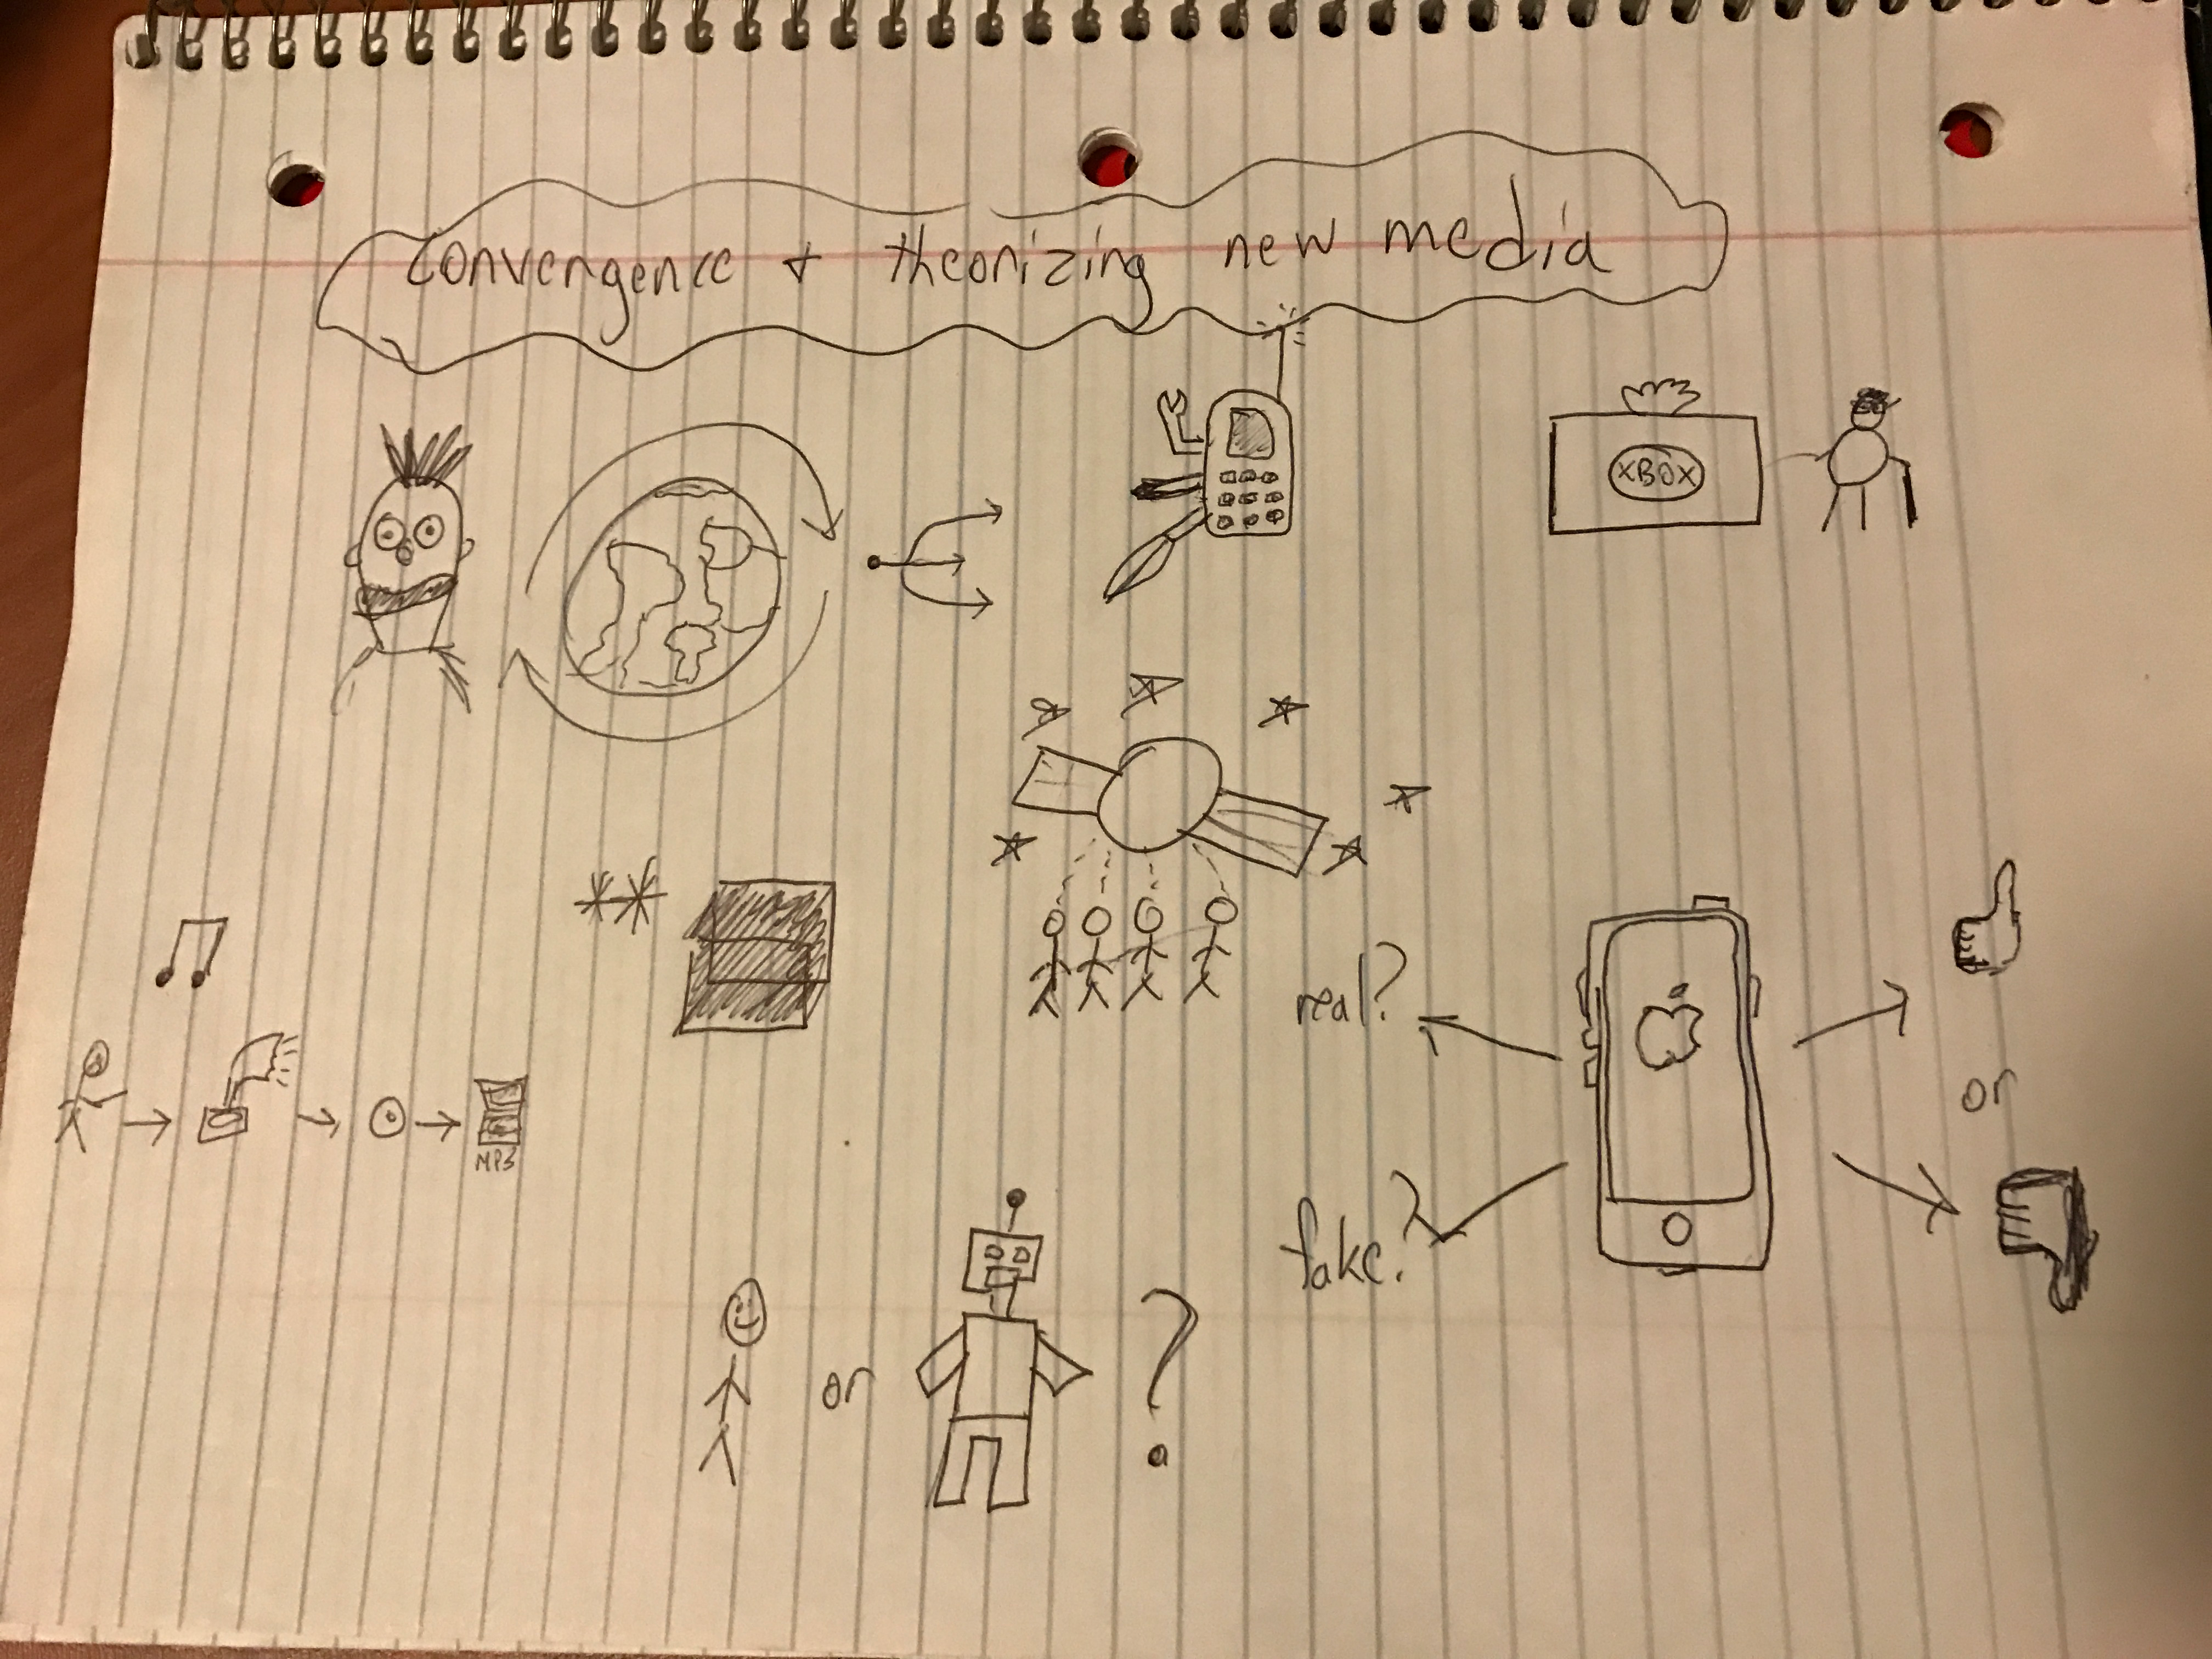 Visual Note Taking: A Journey In Convergence and New Media